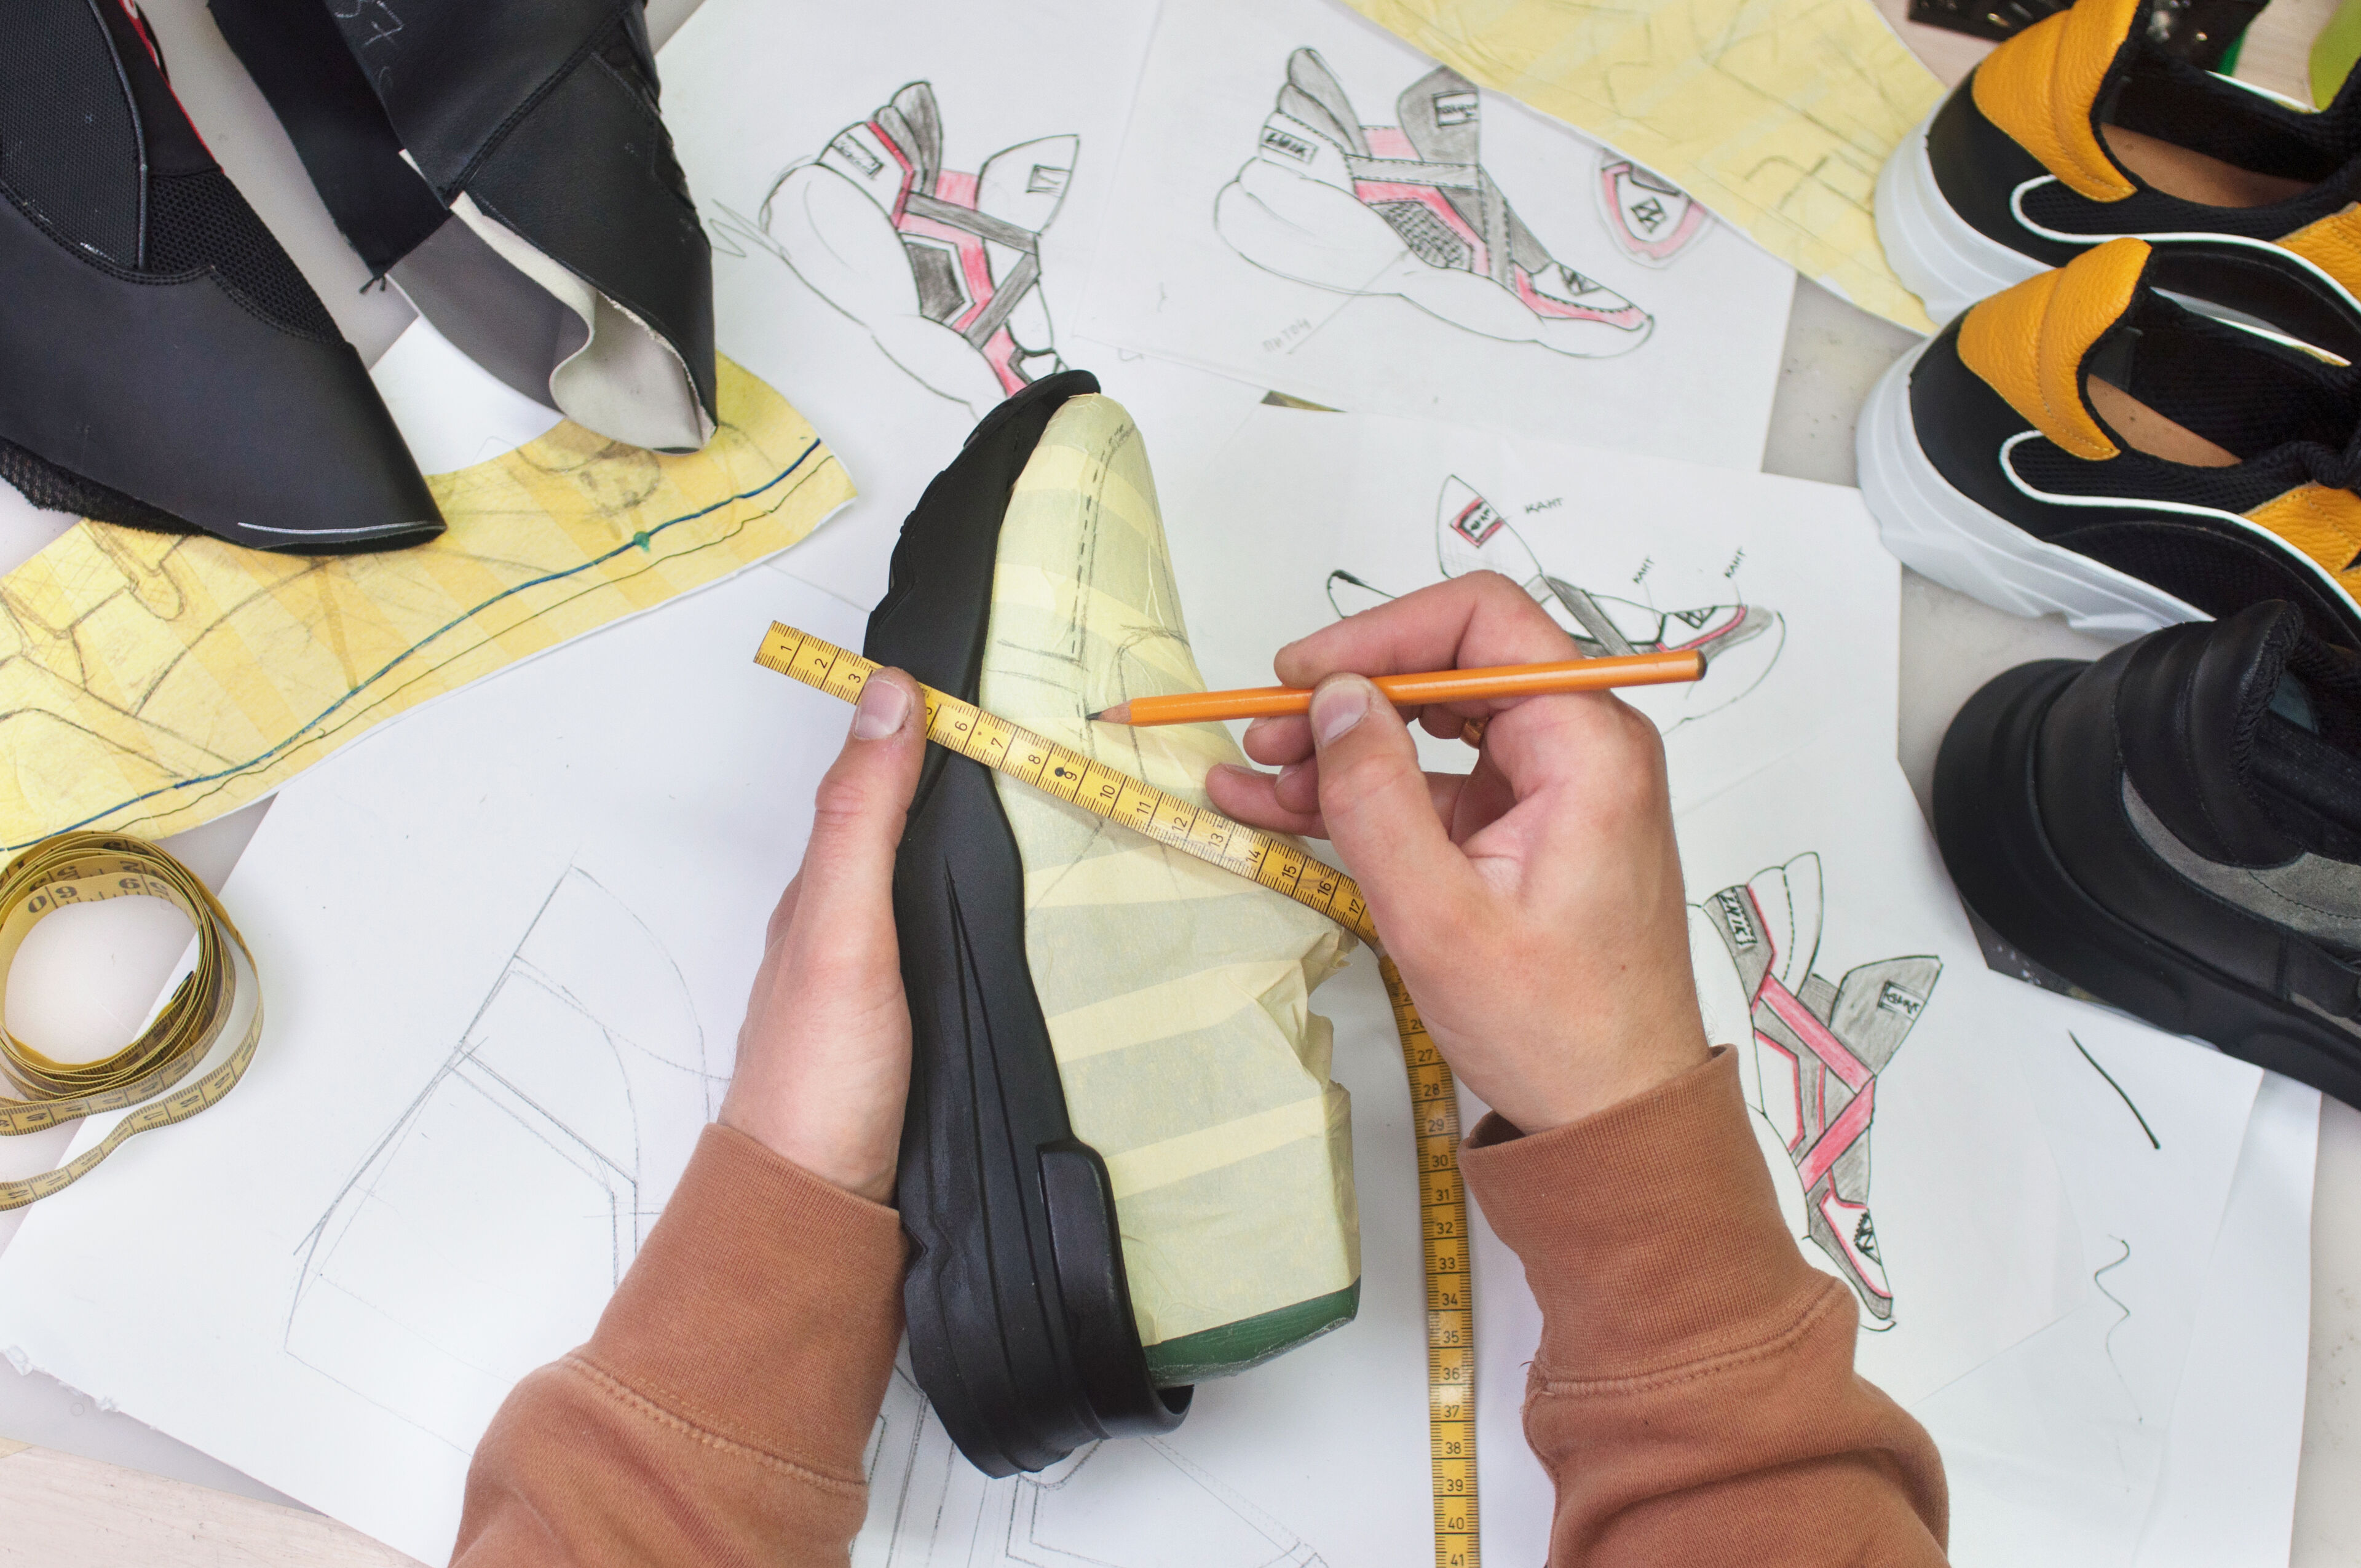 A hand measures a sneaker prototype with a tape measure amid sketches and other prototypes.